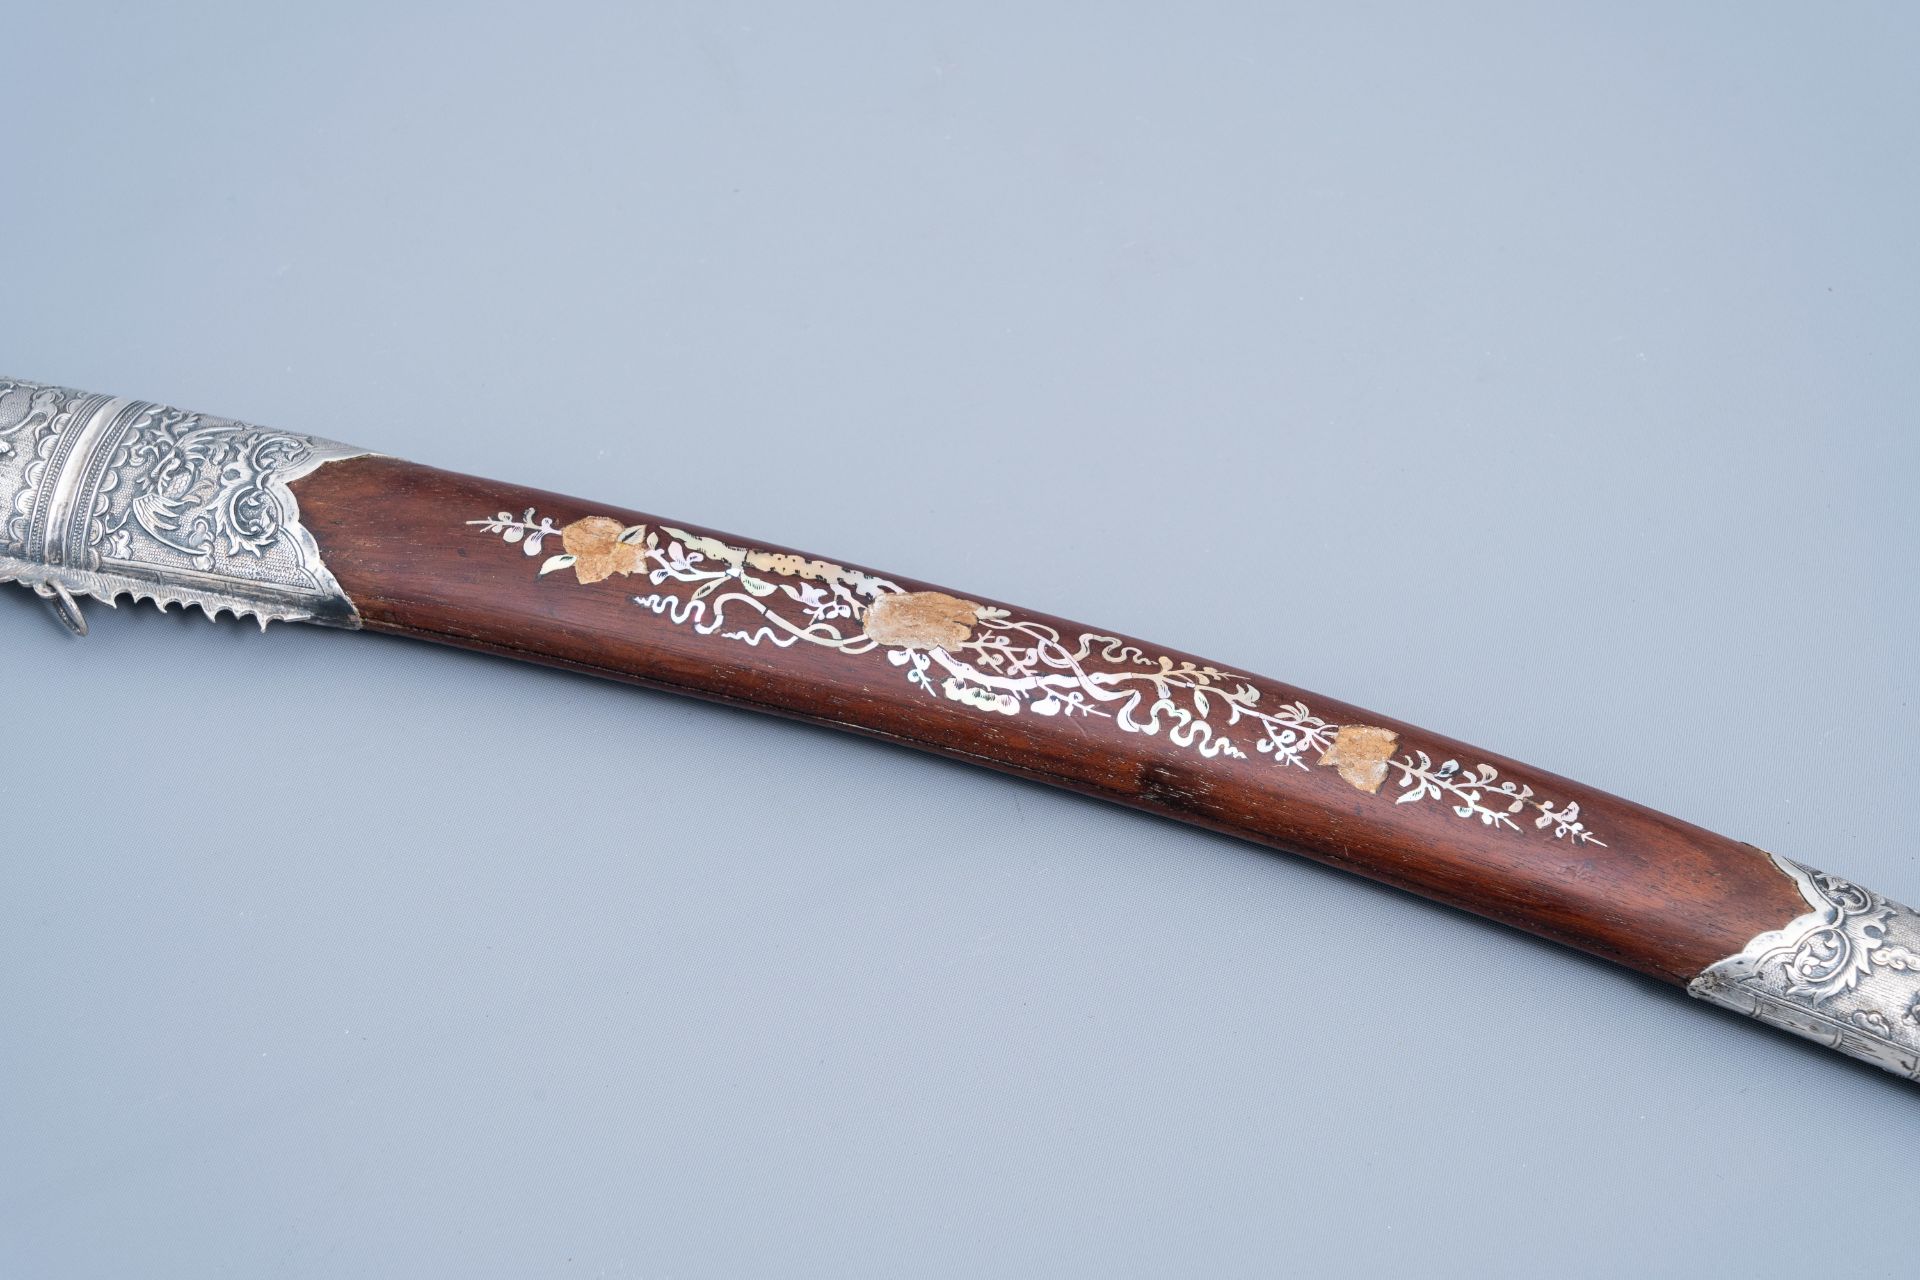 AÊ ceremonial Vietnamese 'guom' sword with silver and mother-of-pearl inlaid wooden scabbard with dr - Image 7 of 13